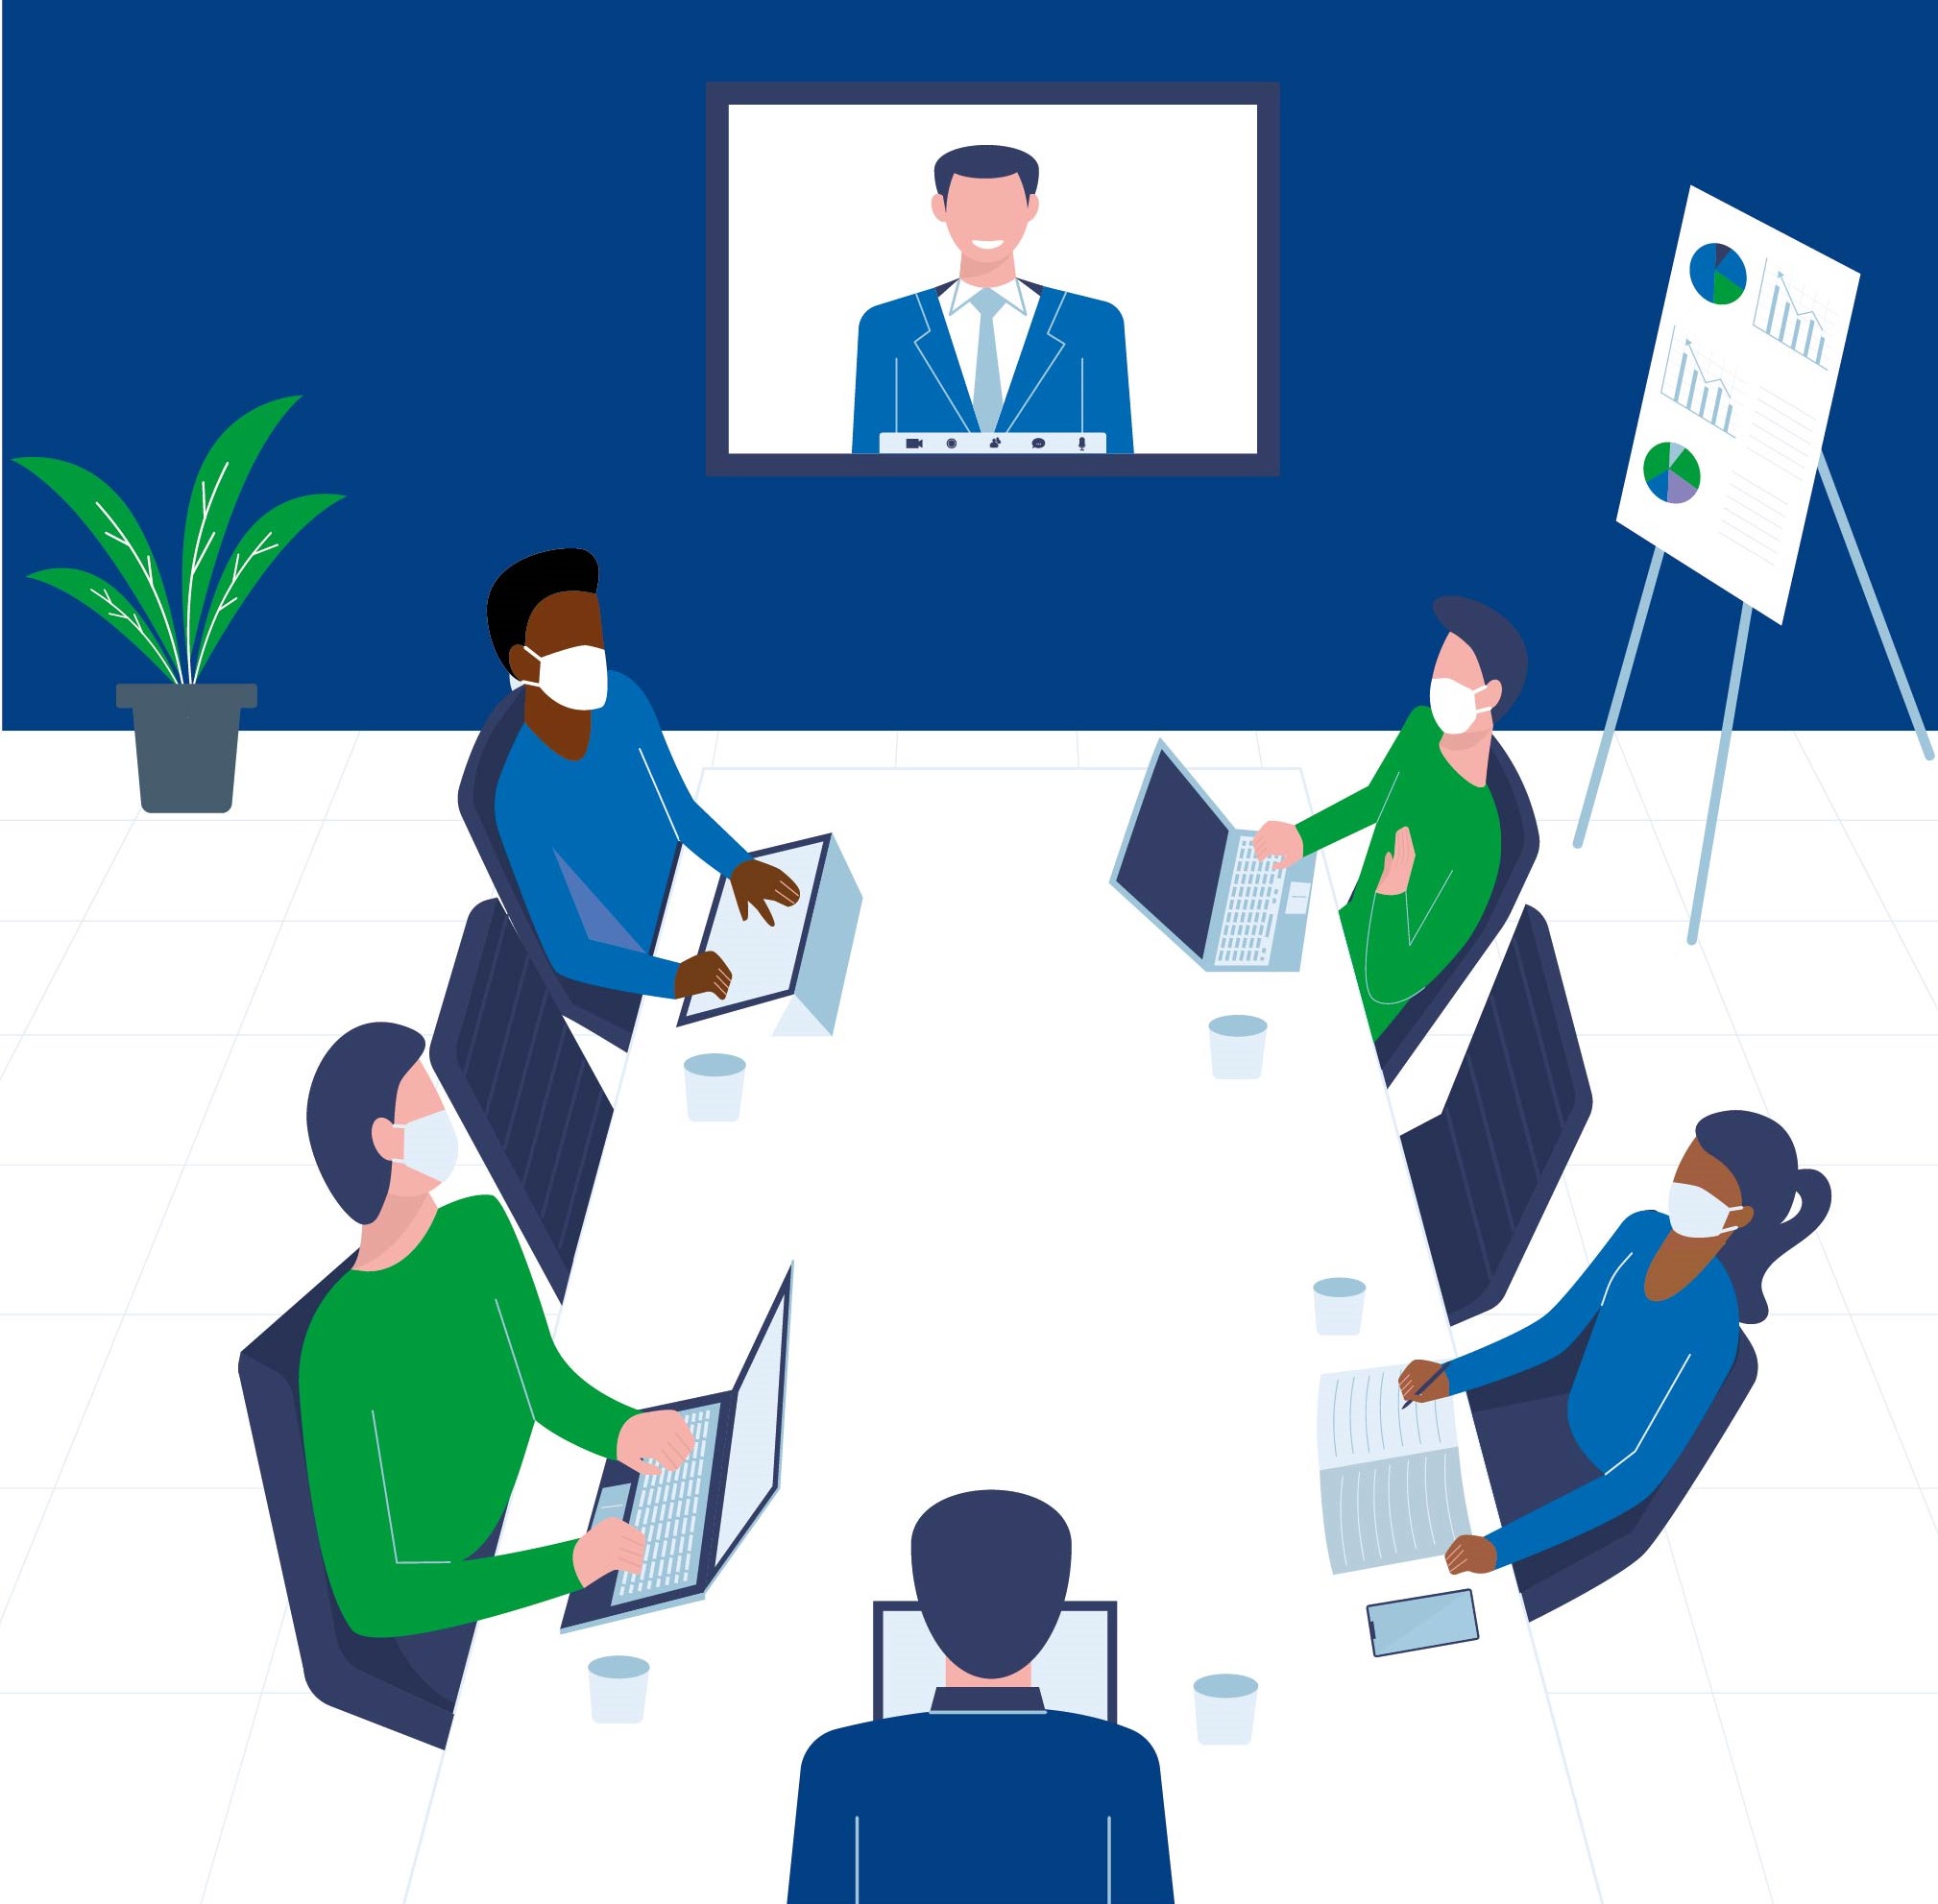 Image of people in a meeting room